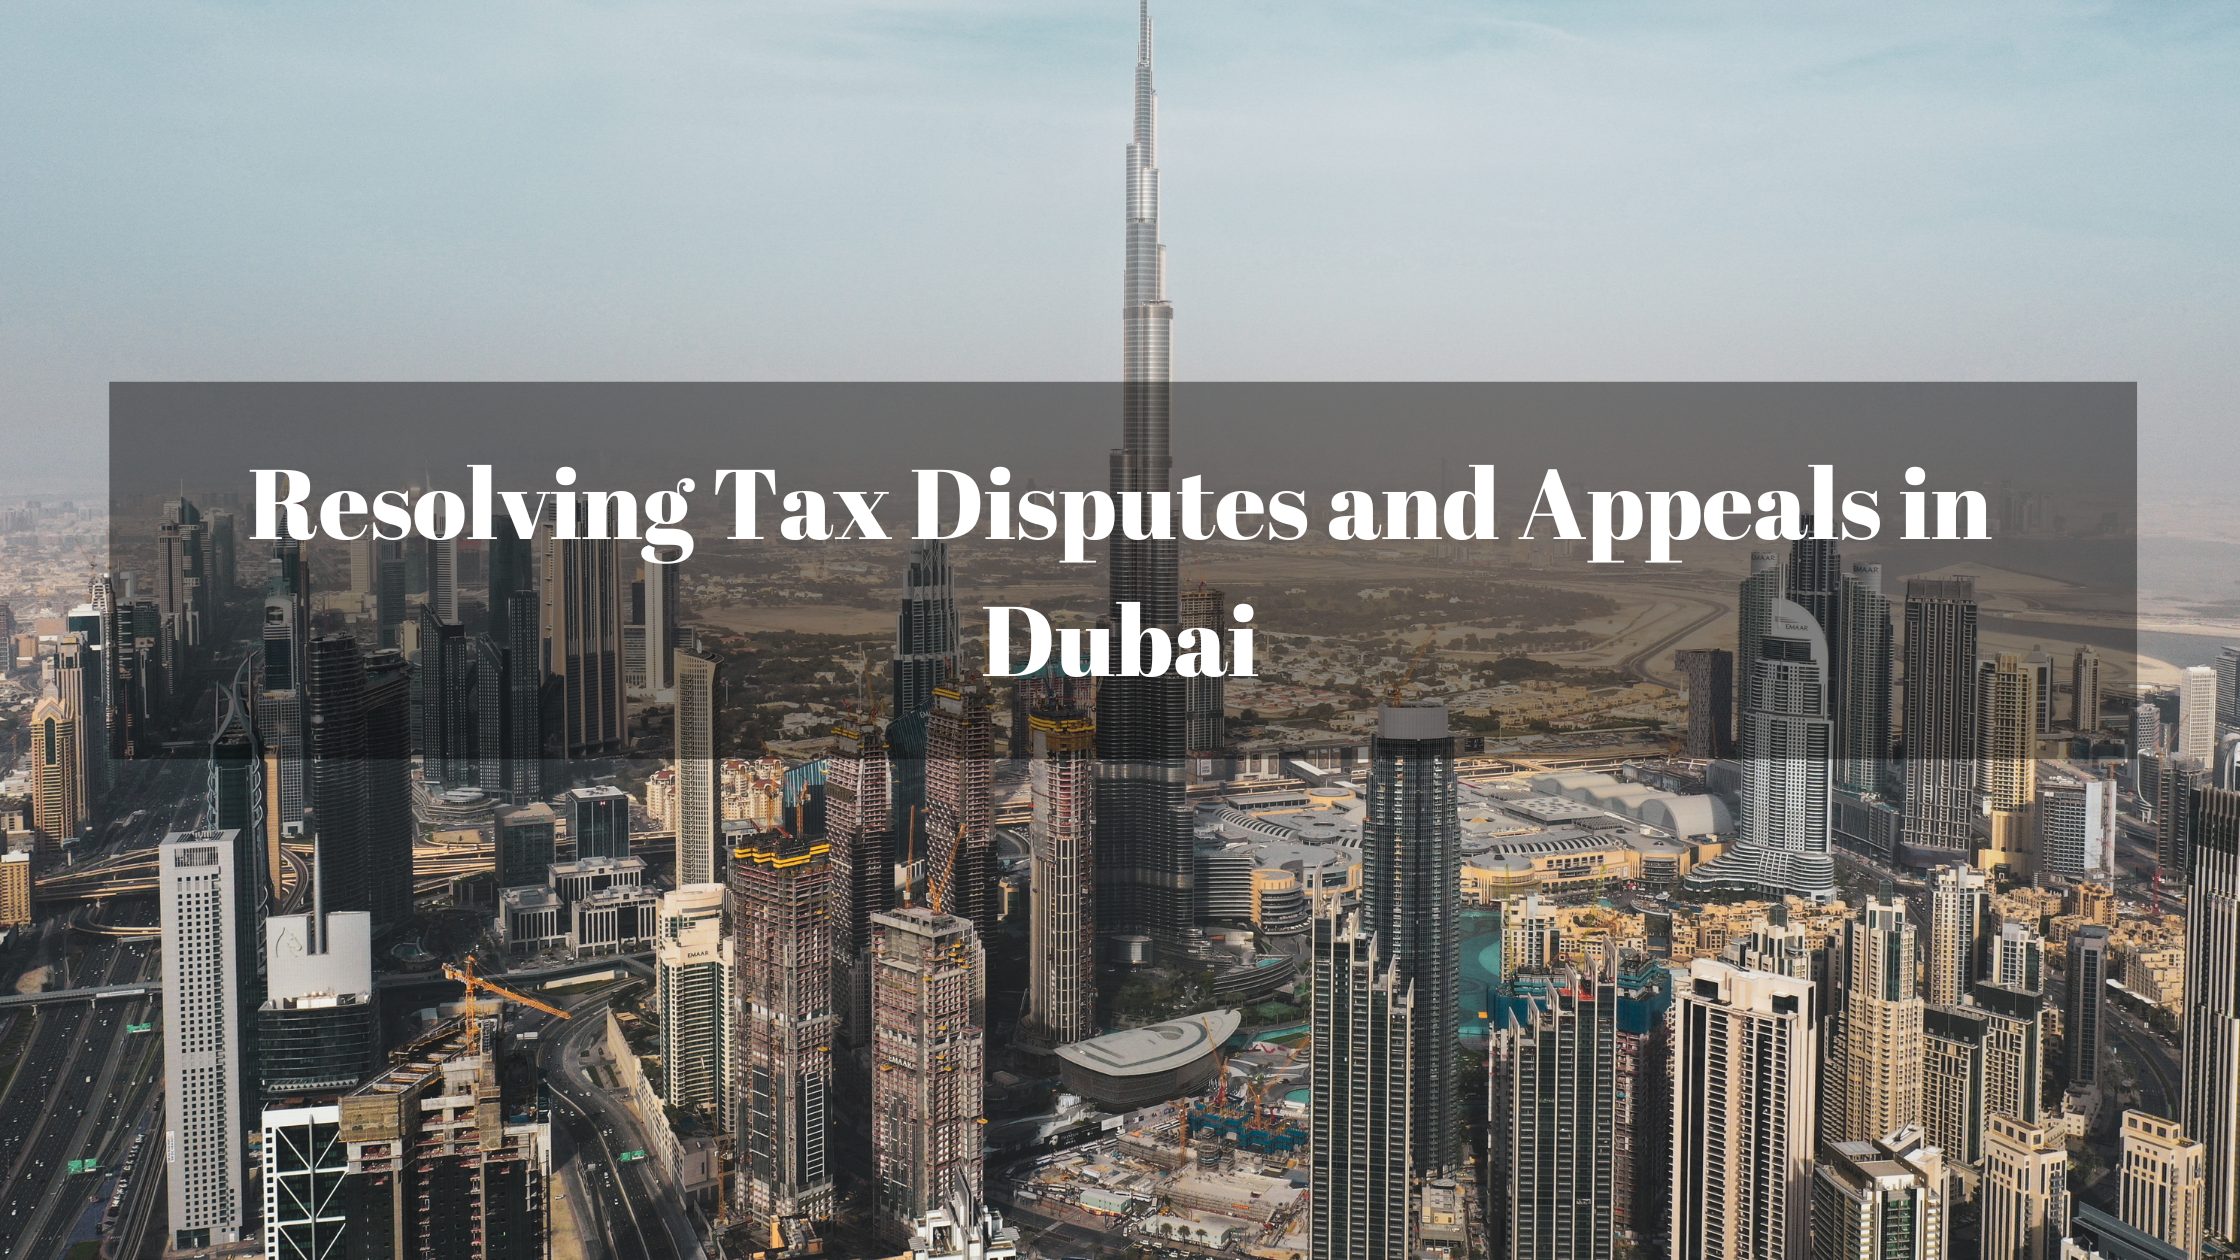 Tax Disputes and Appeals in Dubai